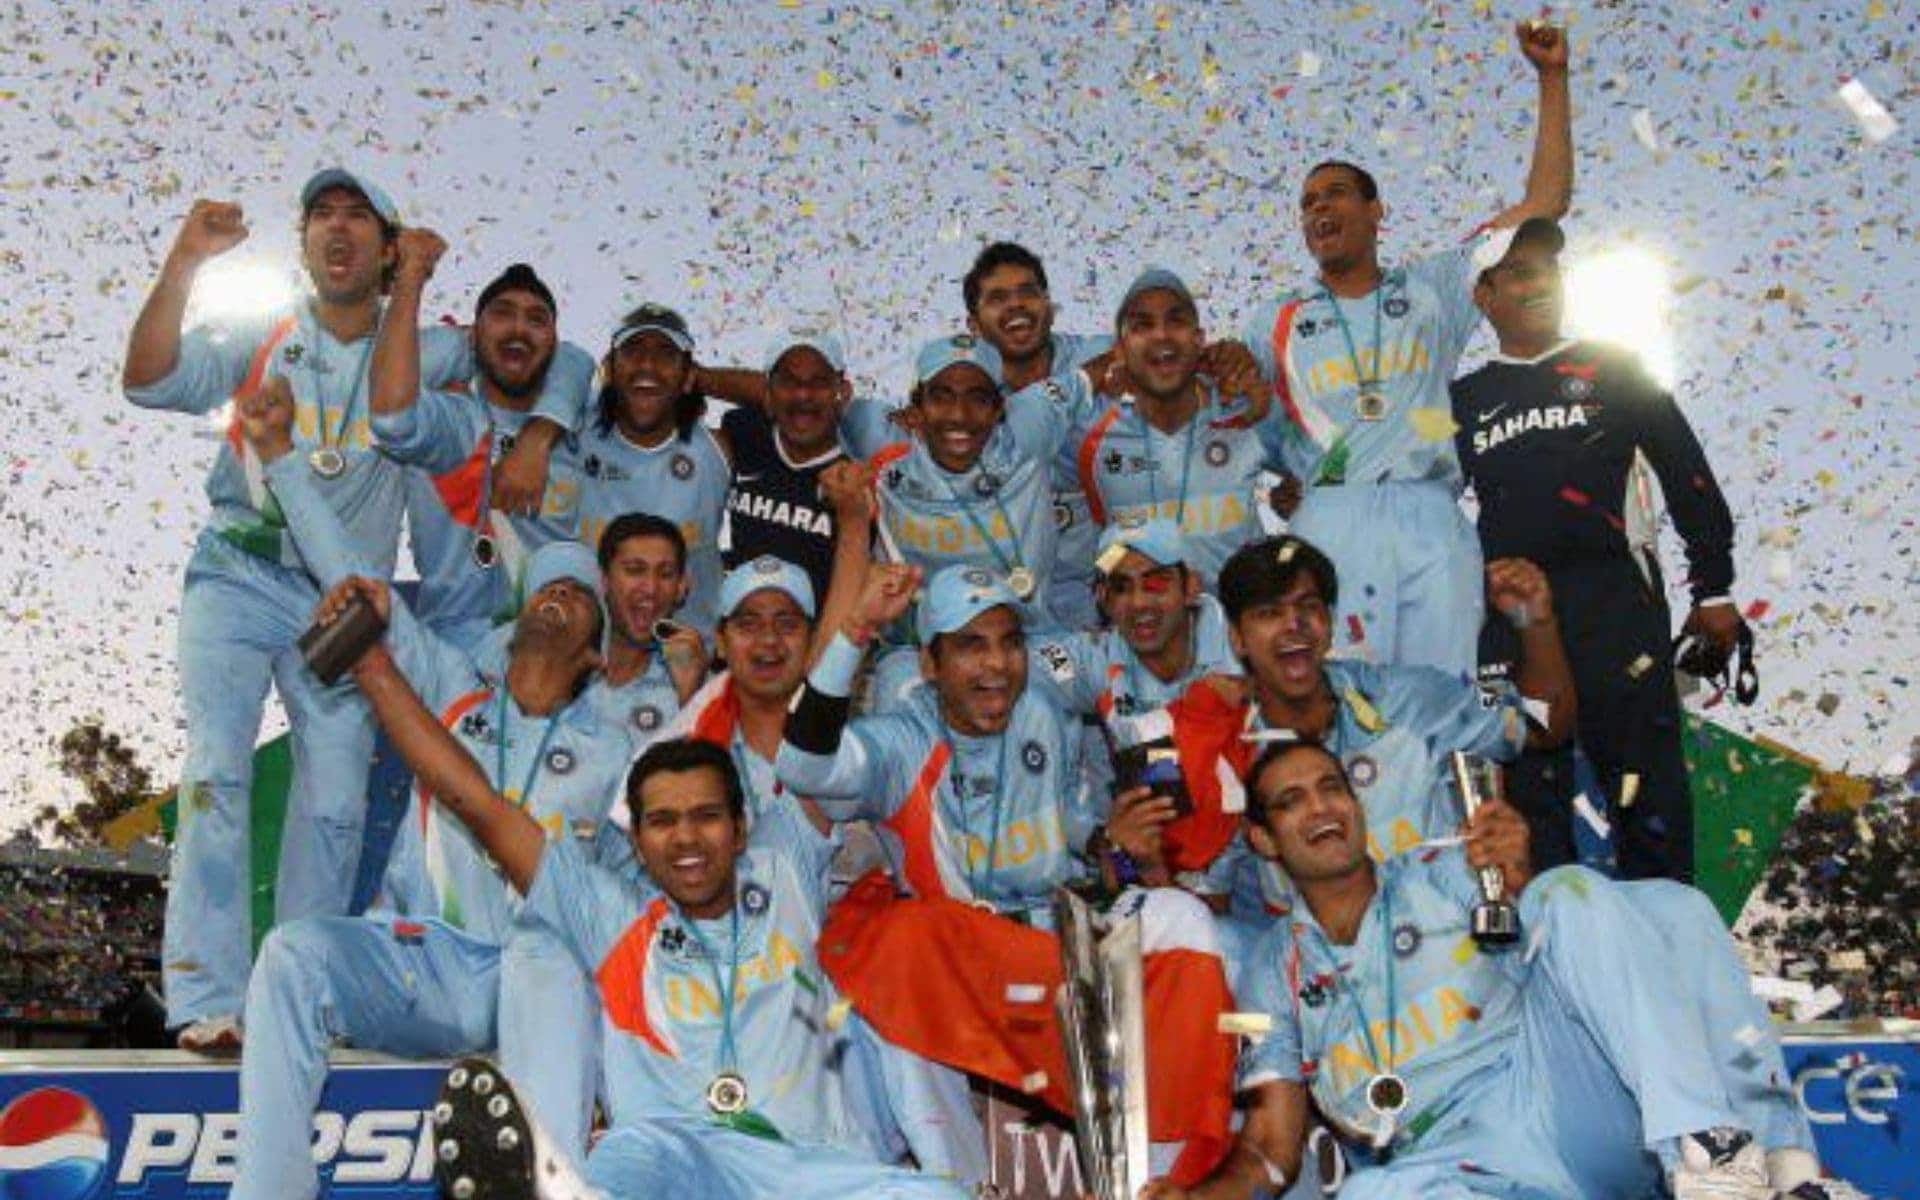 India was the inaugural T20 World Cup winner in 2007 (x.com)